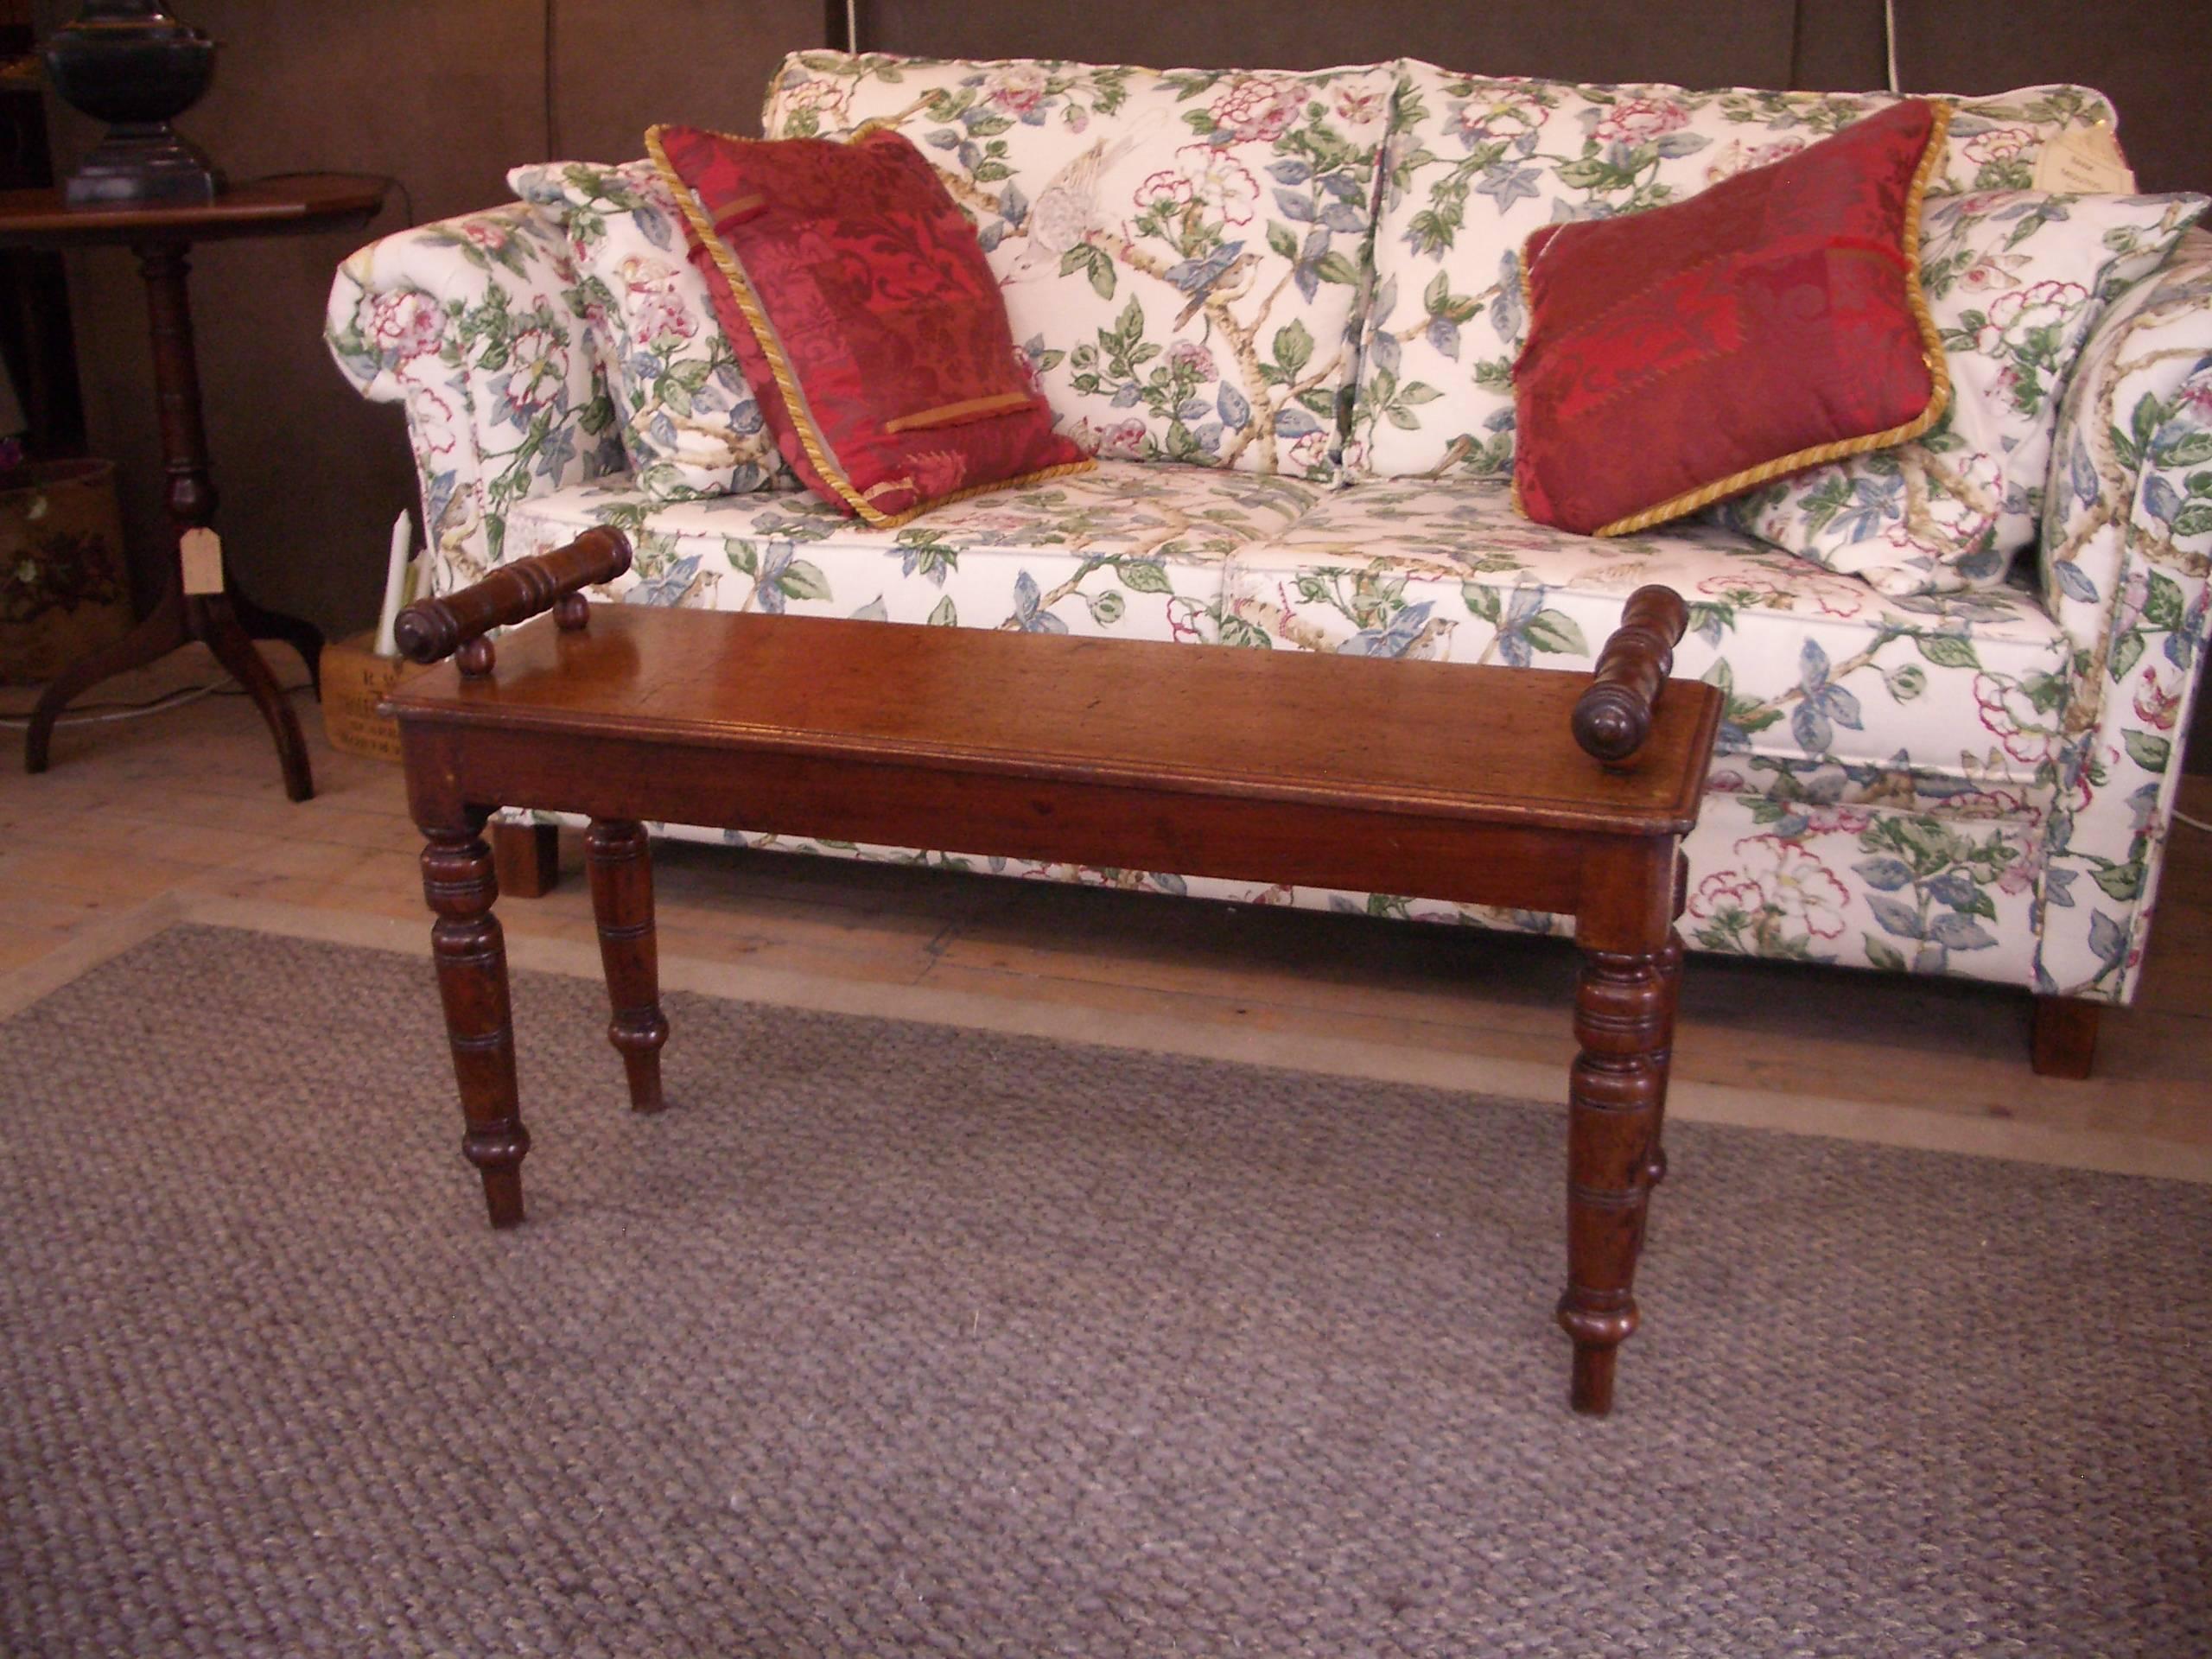 Nice and completely original mahogany window seat in good condition. Wonderful patina.